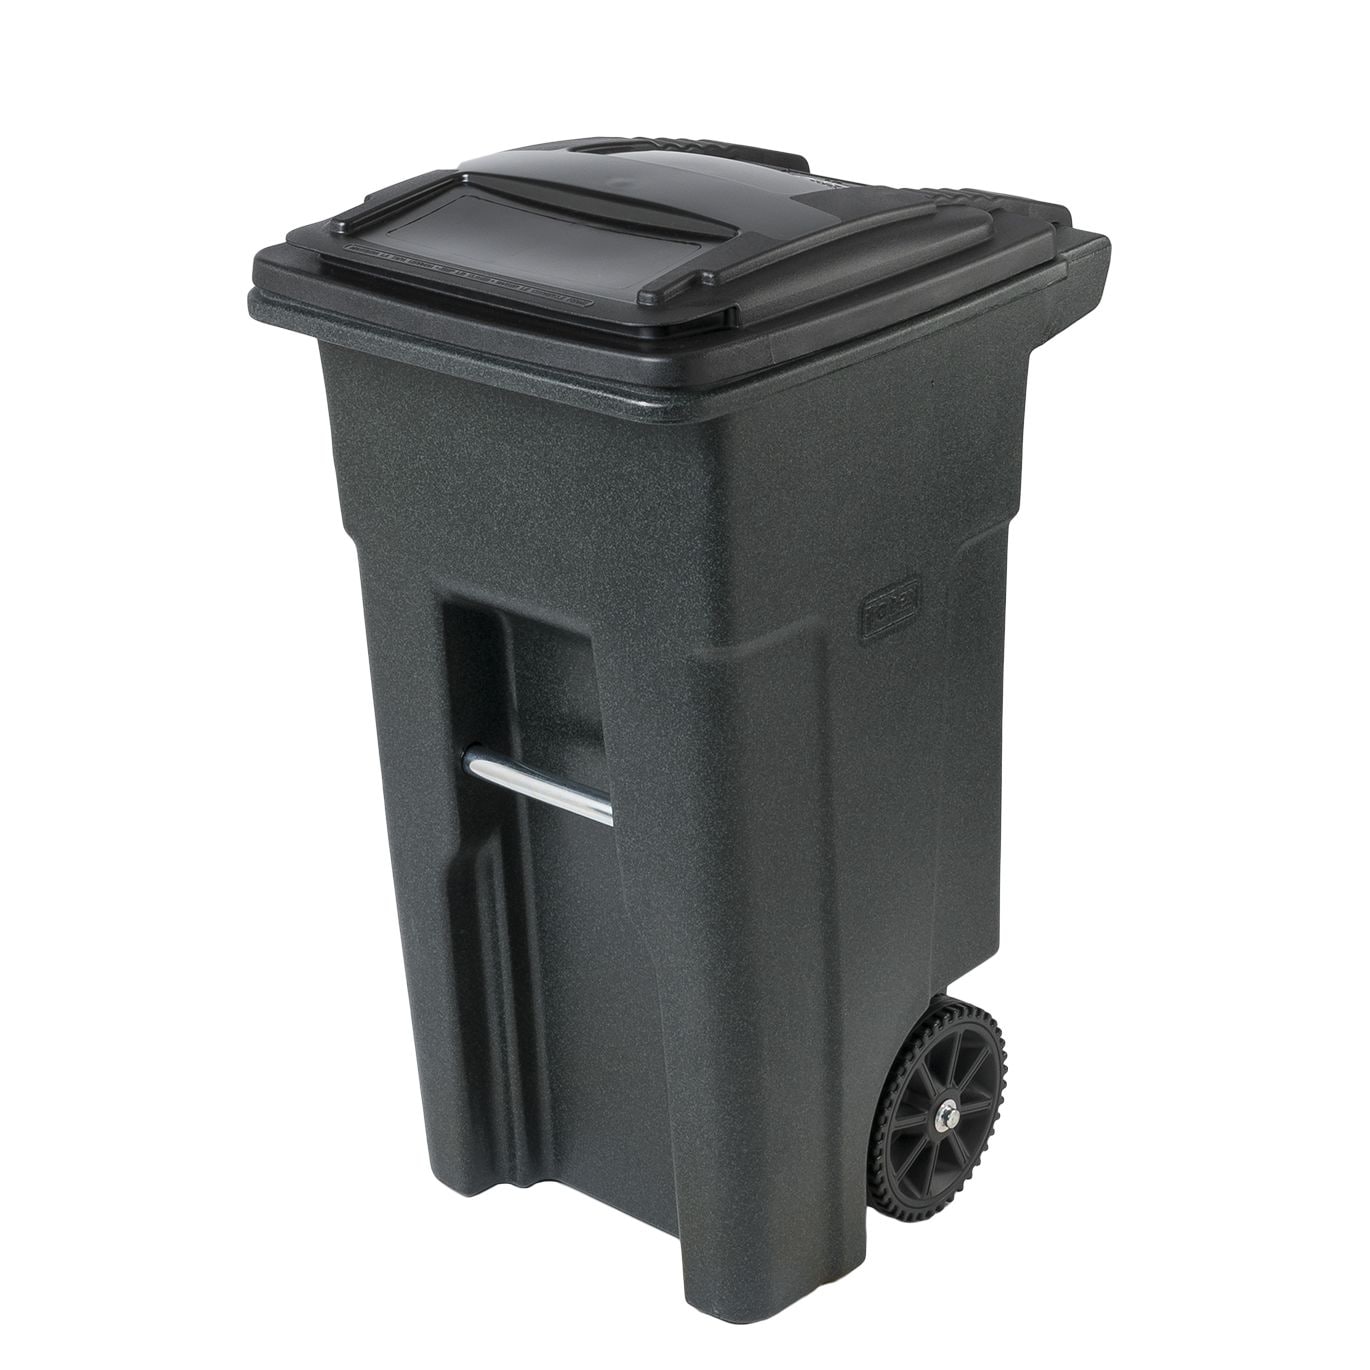 Small trash can with lid - household items - by owner - housewares